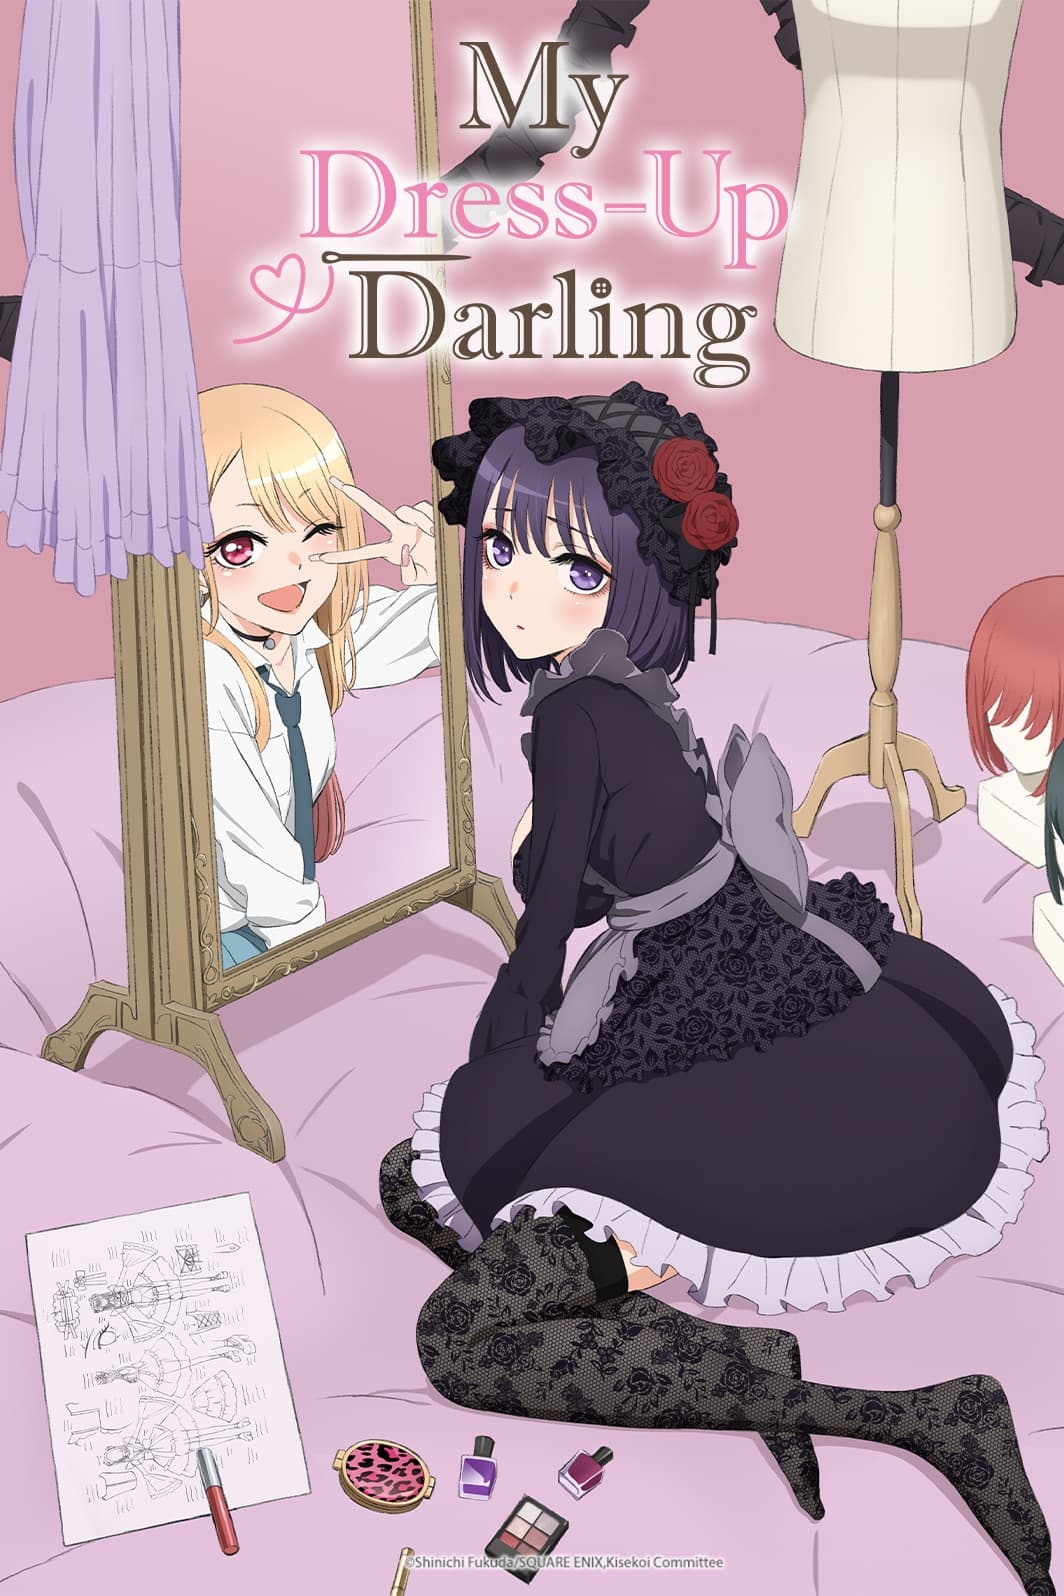 Watch My Dress Up Darling Online On Simple Anime